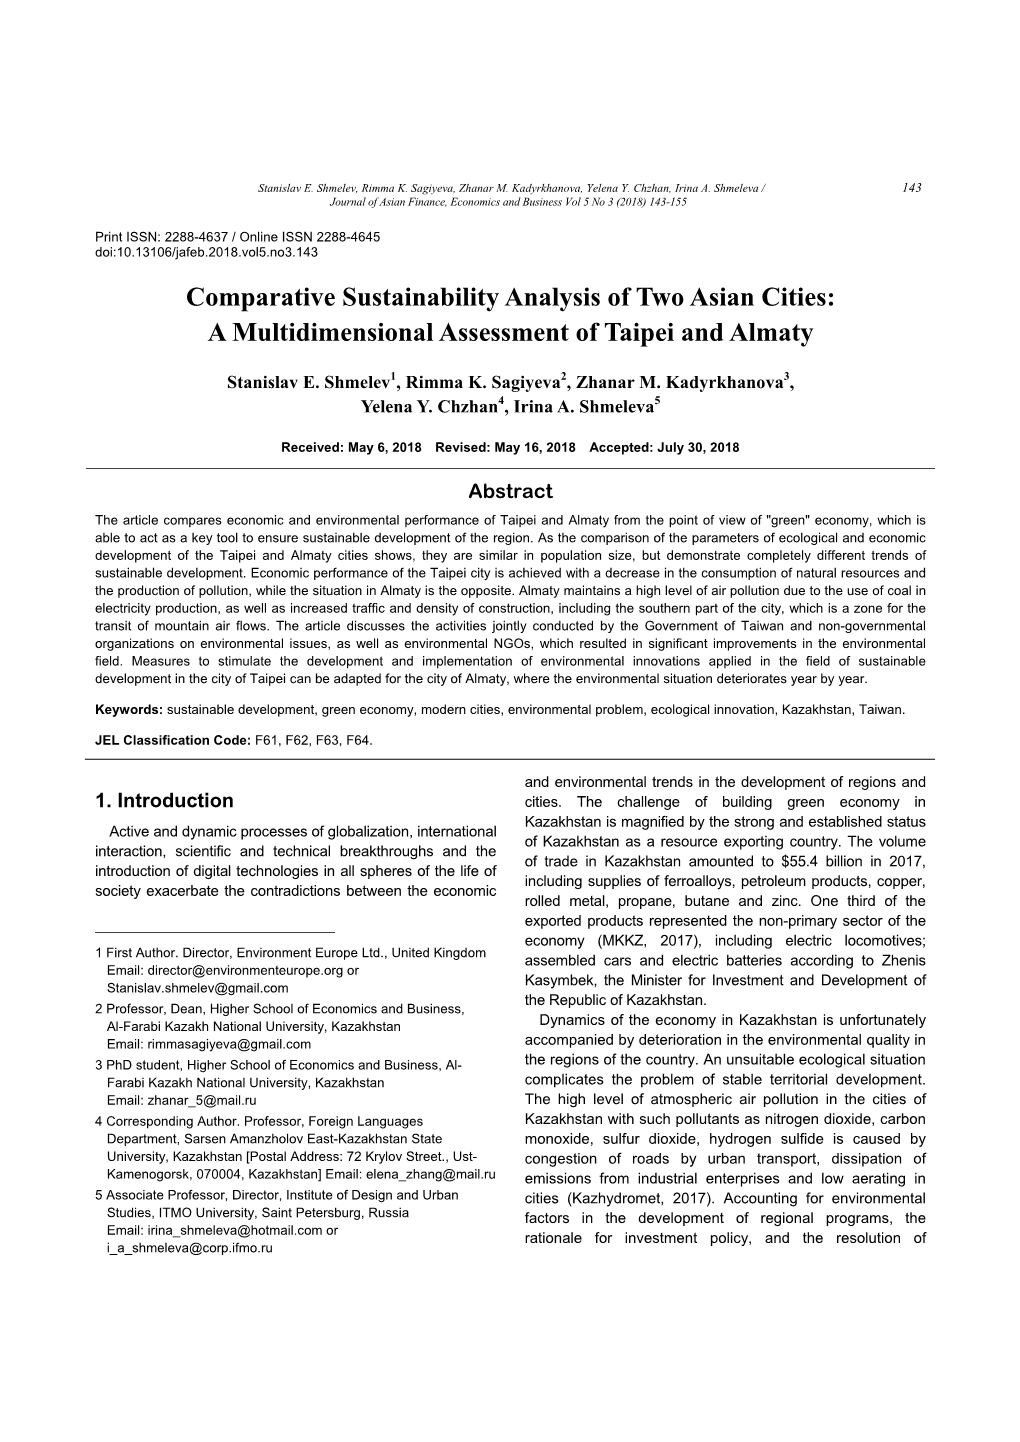 Comparative Sustainability Analysis of Two Asian Cities: a Multidimensional Assessment of Taipei and Almaty